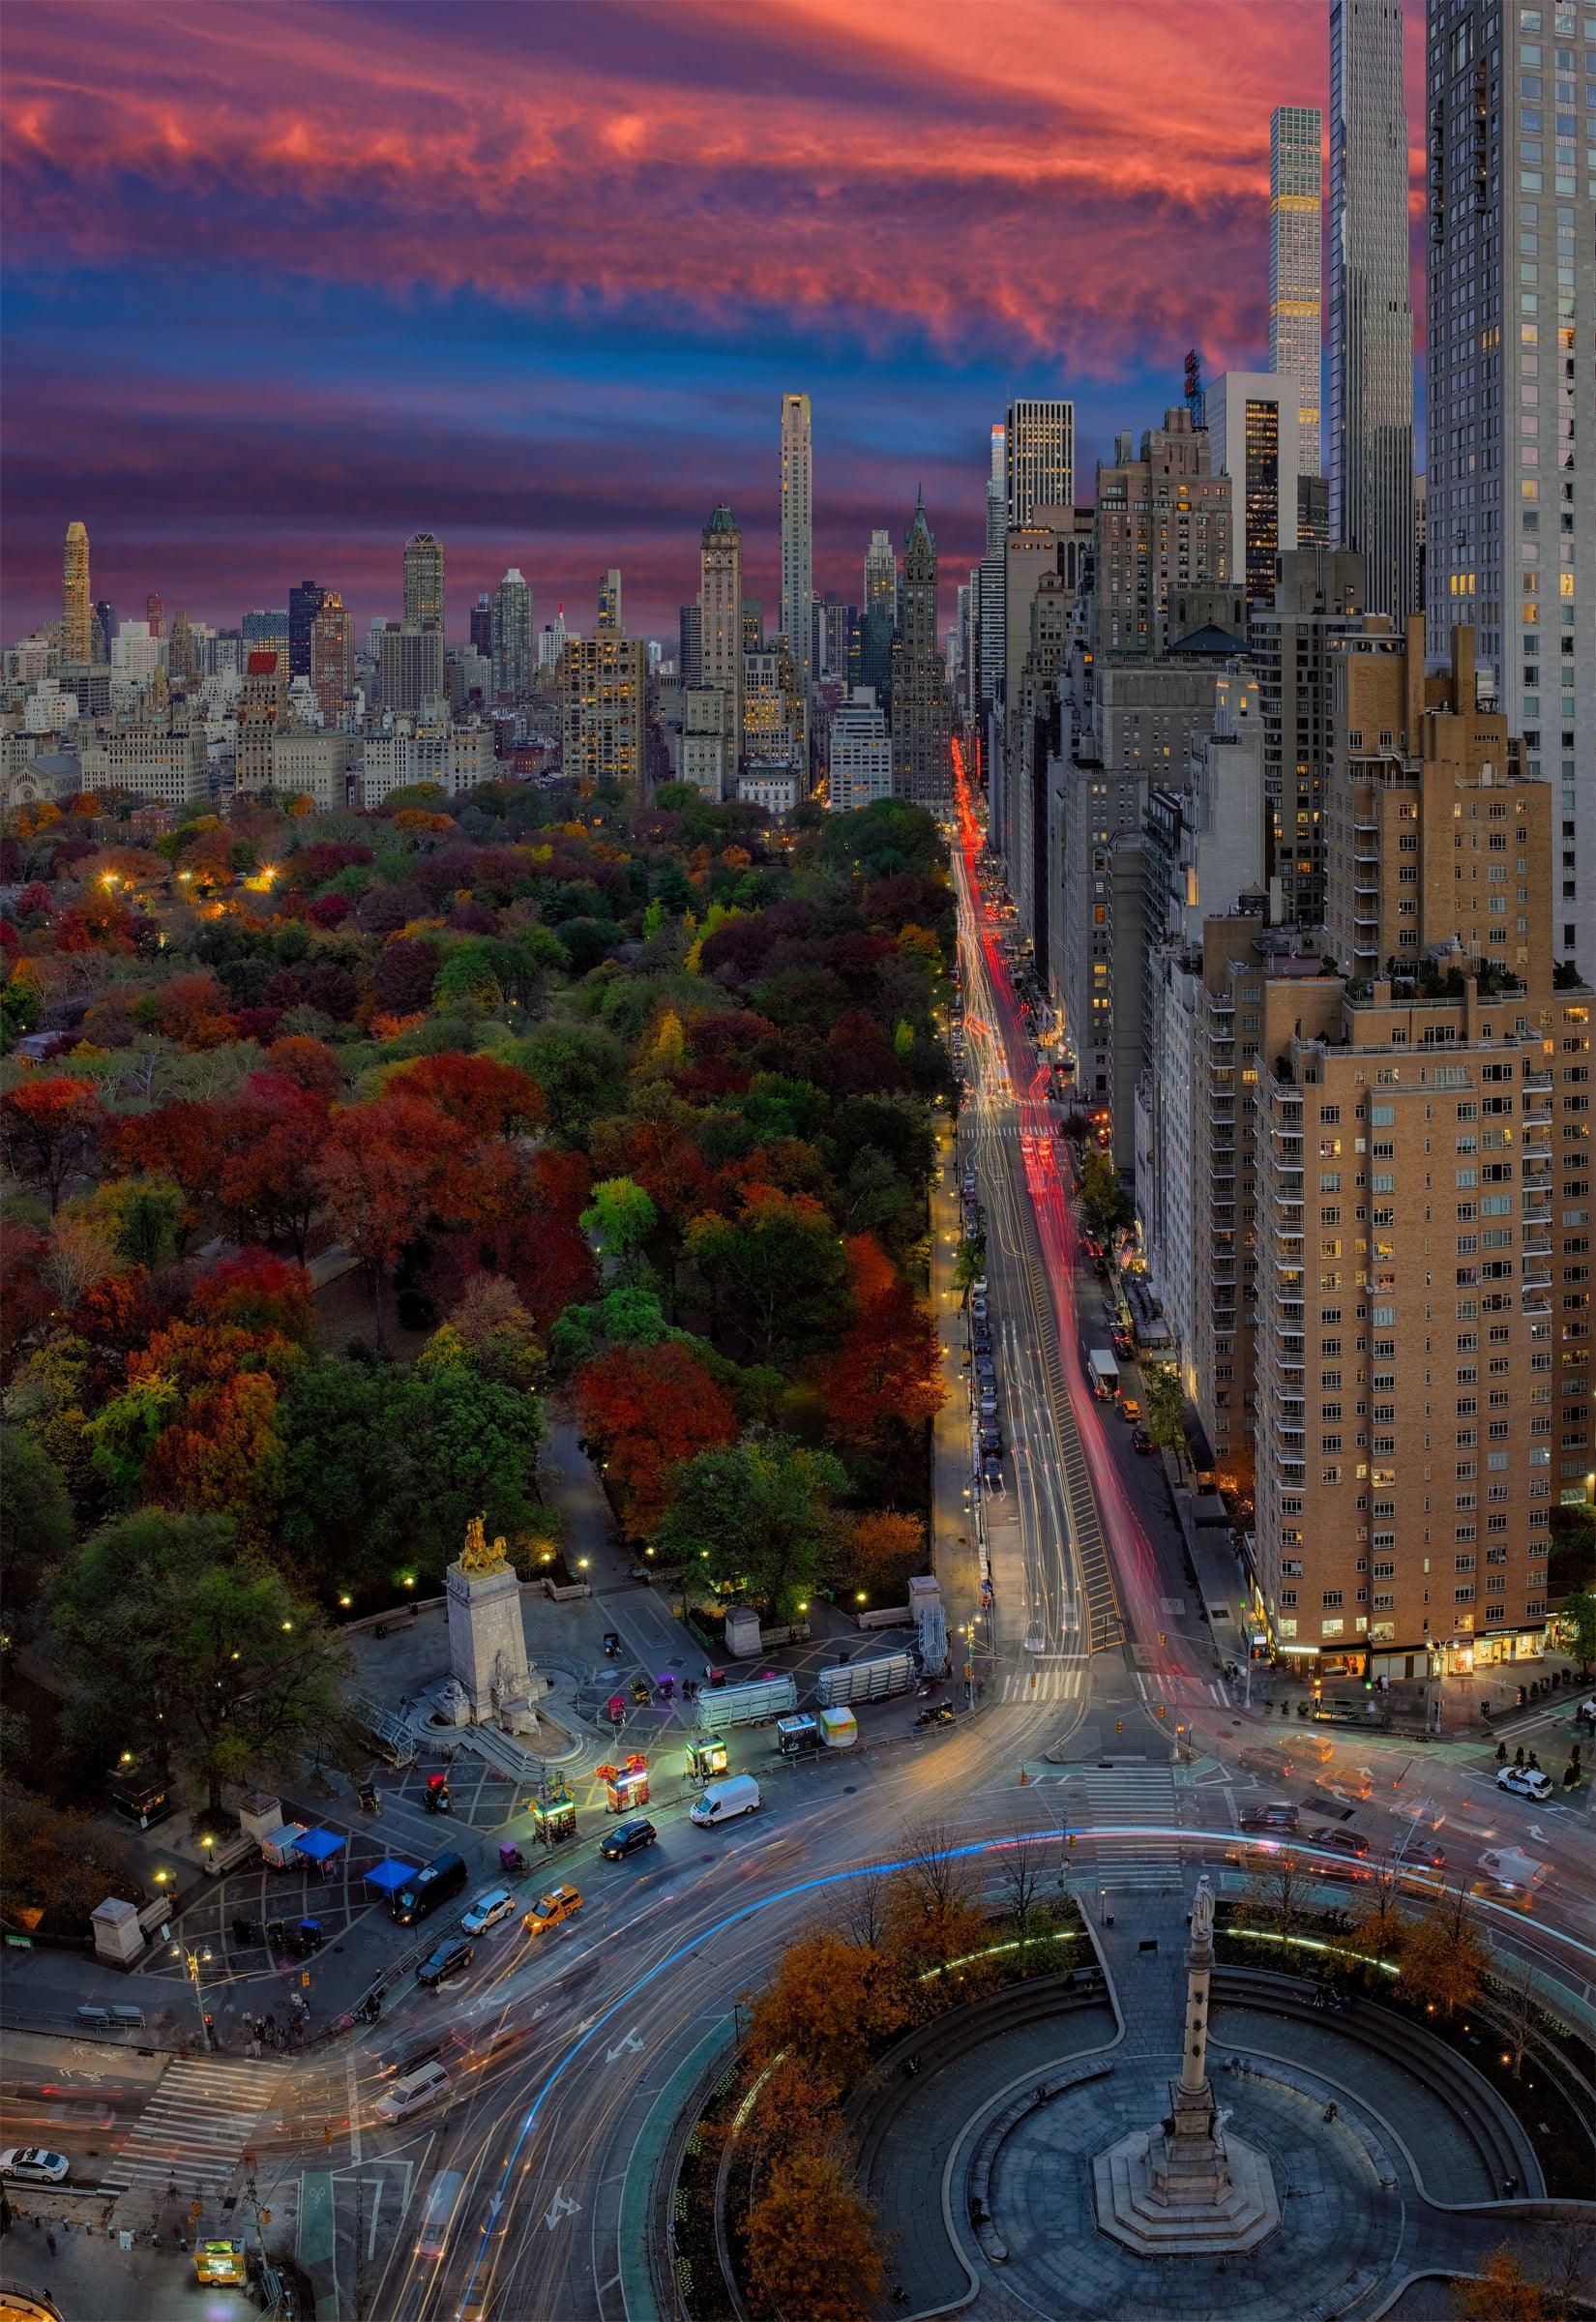 Photograph from Peter Lik of a roundabout in a city with skyline in background titled Magical City | LIK Fine Art